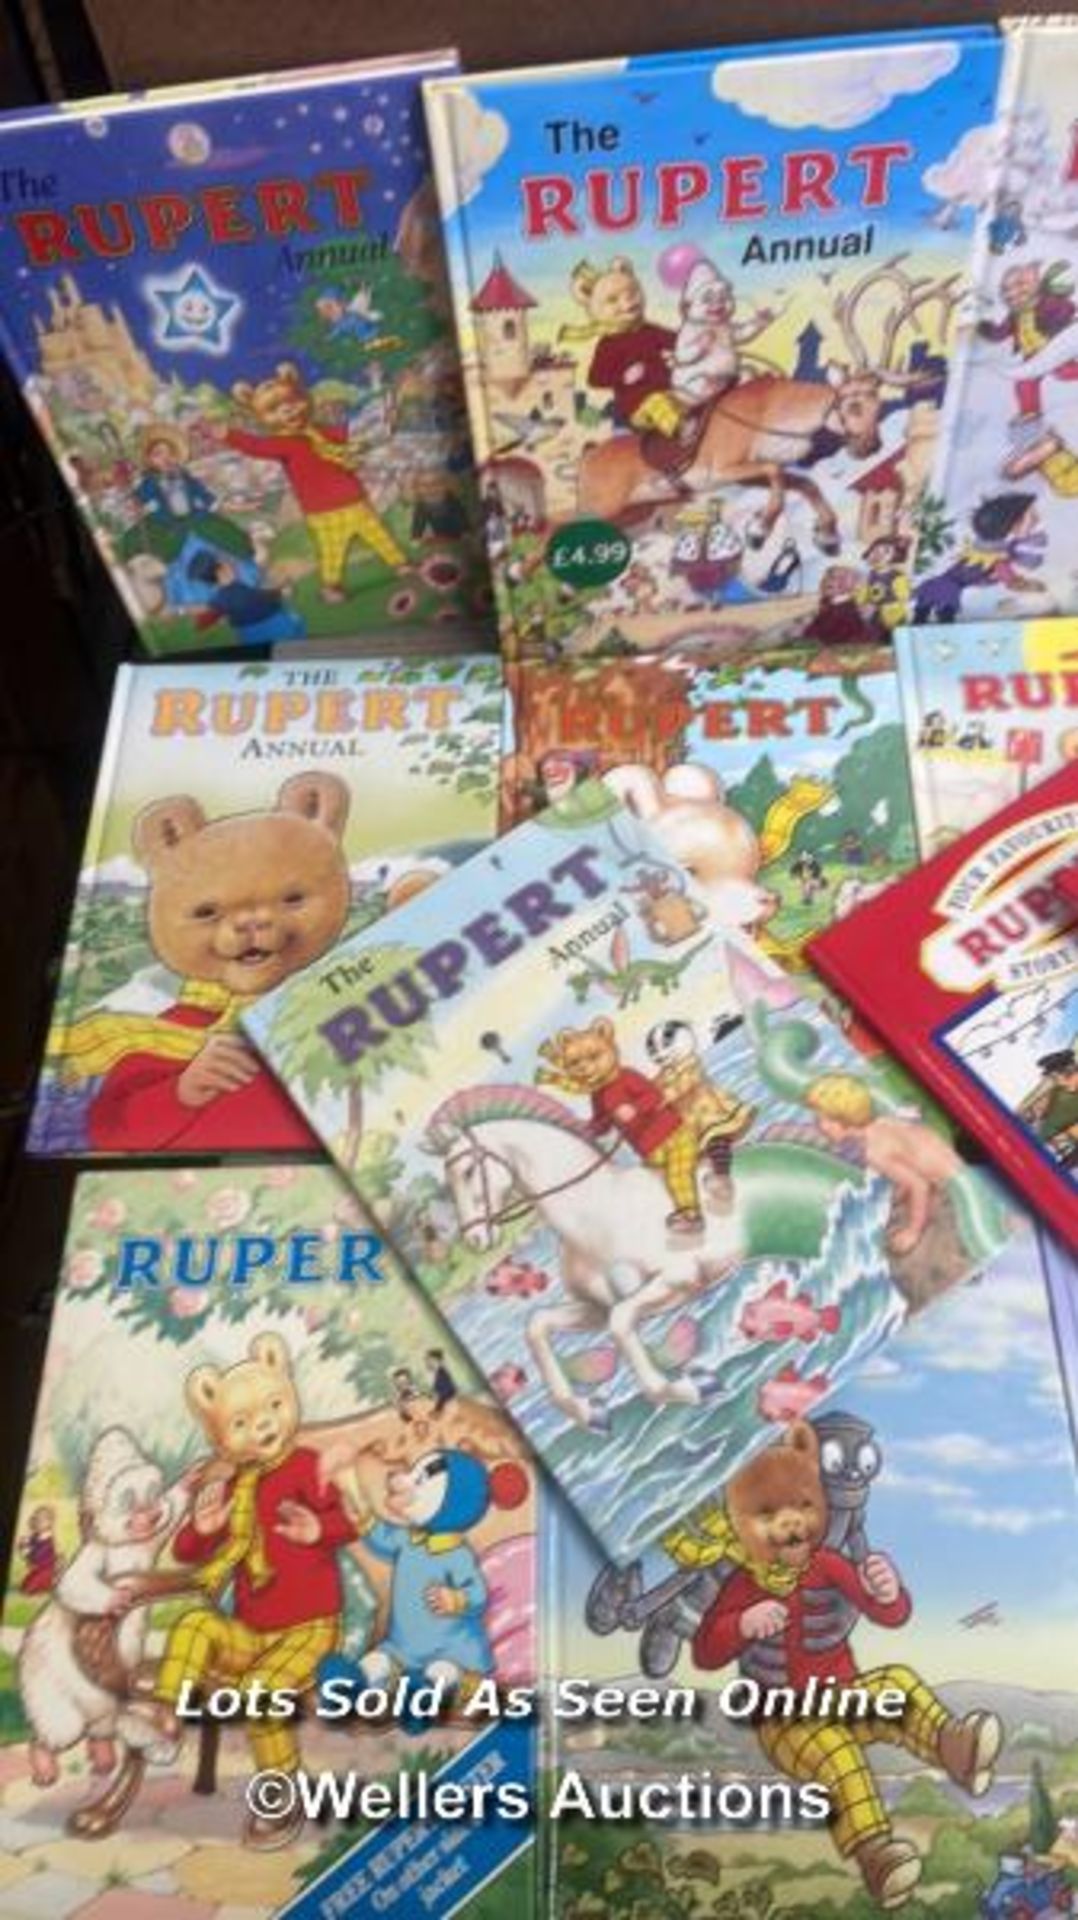 A COLLECTION OF MODERN 1990'S - 2000'S RUPERT BEAR BOOKS AND ANNUALS INCLUDING 1959 ANNUAL LIMITED - Image 5 of 7